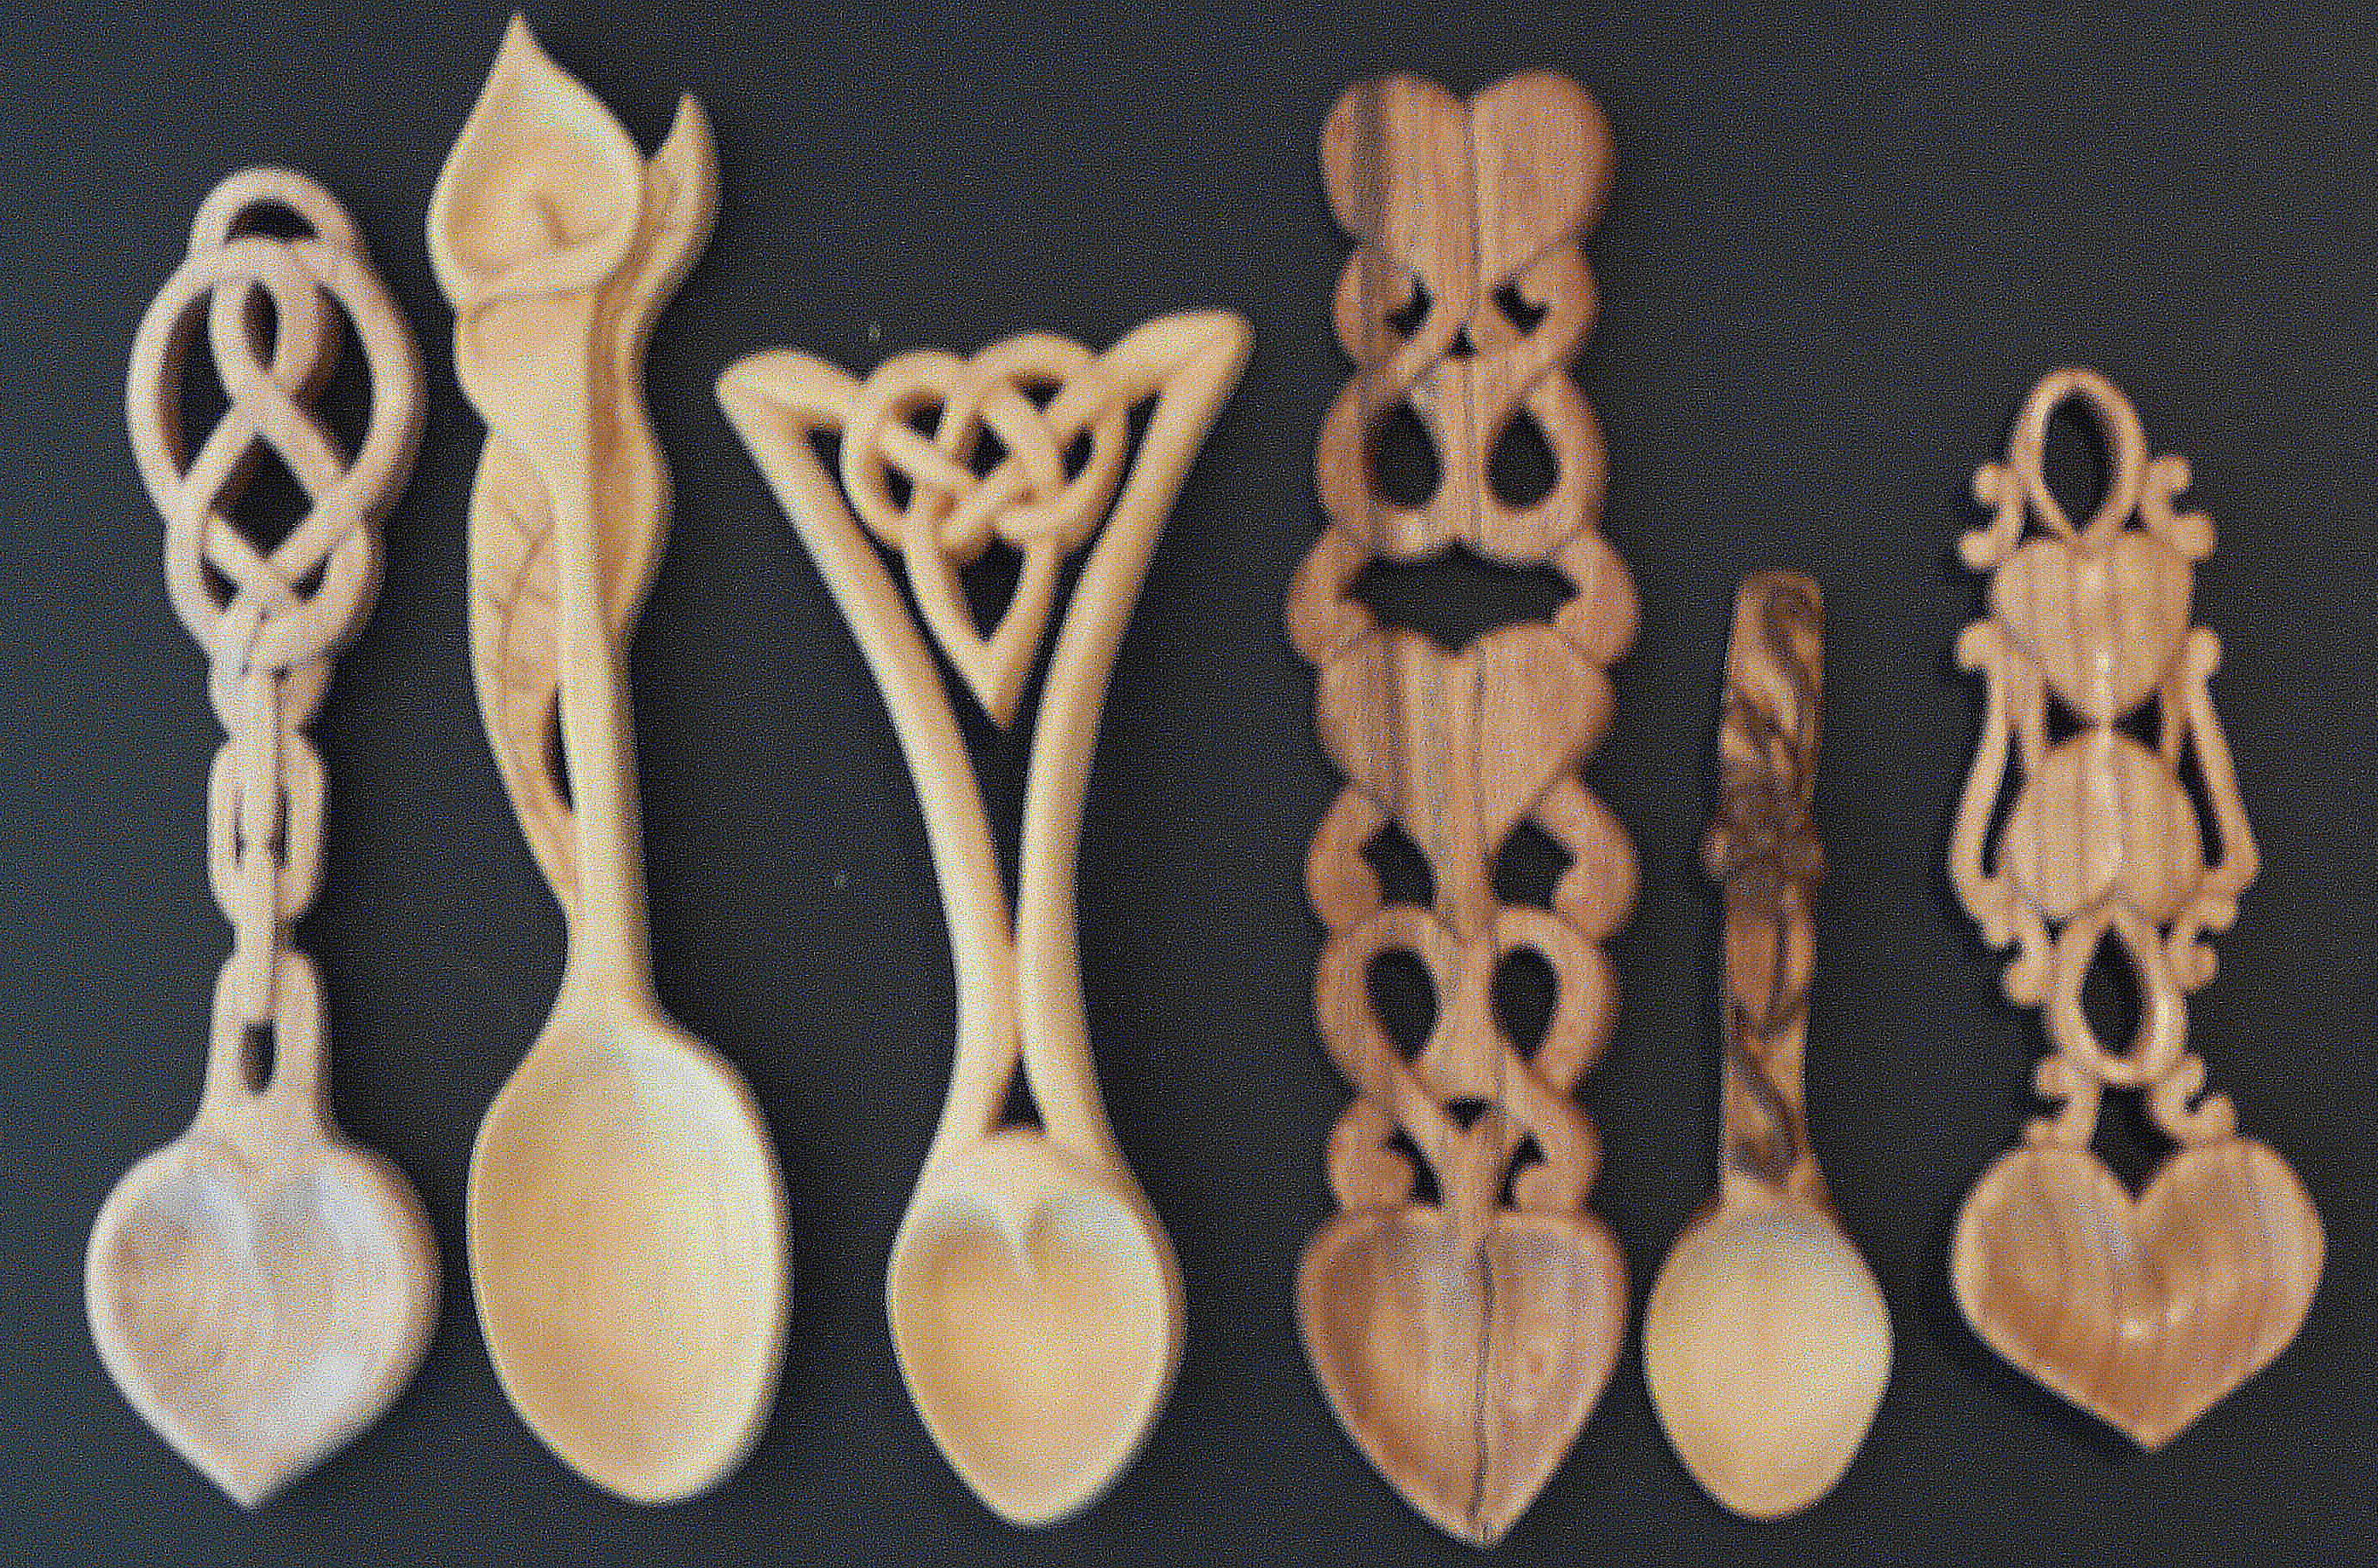 6 Carved Spoons by cskipper